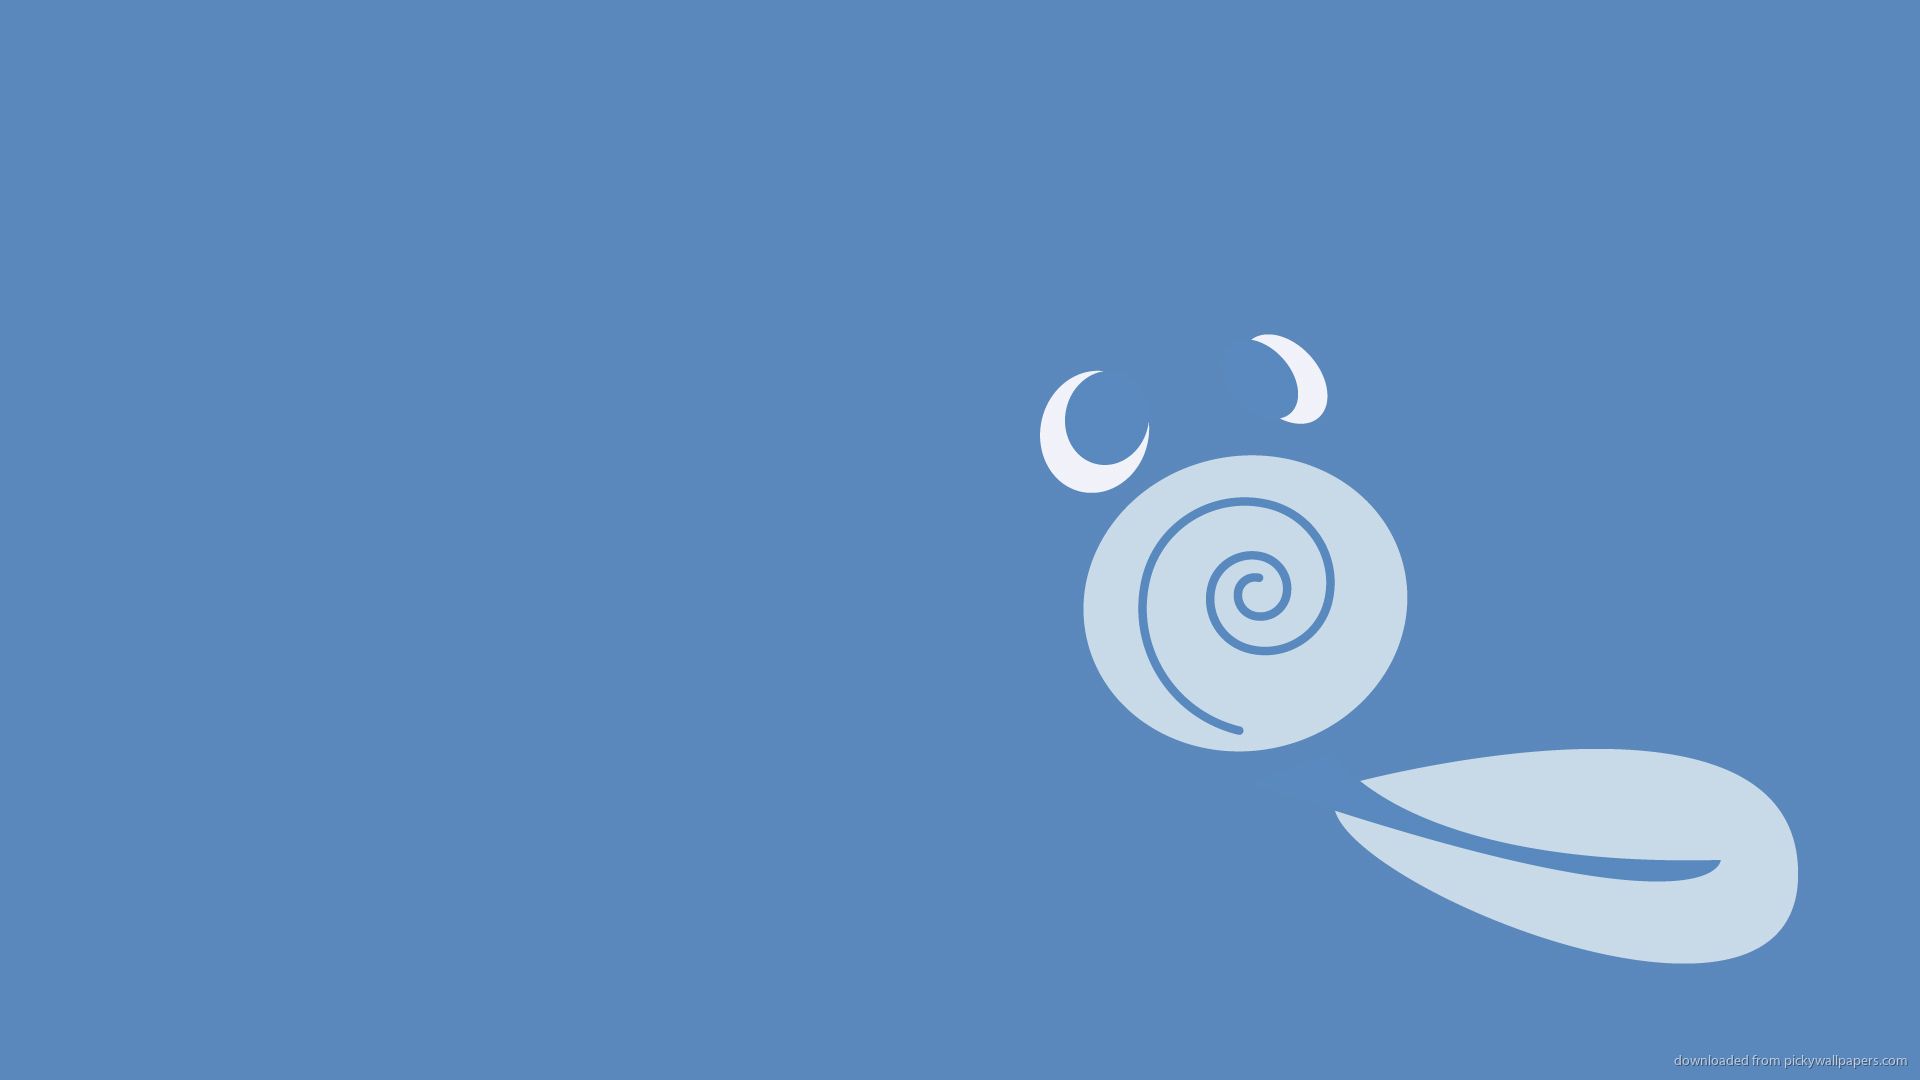 Simple Poliwag Pokemon Wallpaper Picture For iPhone, Blackberry ...